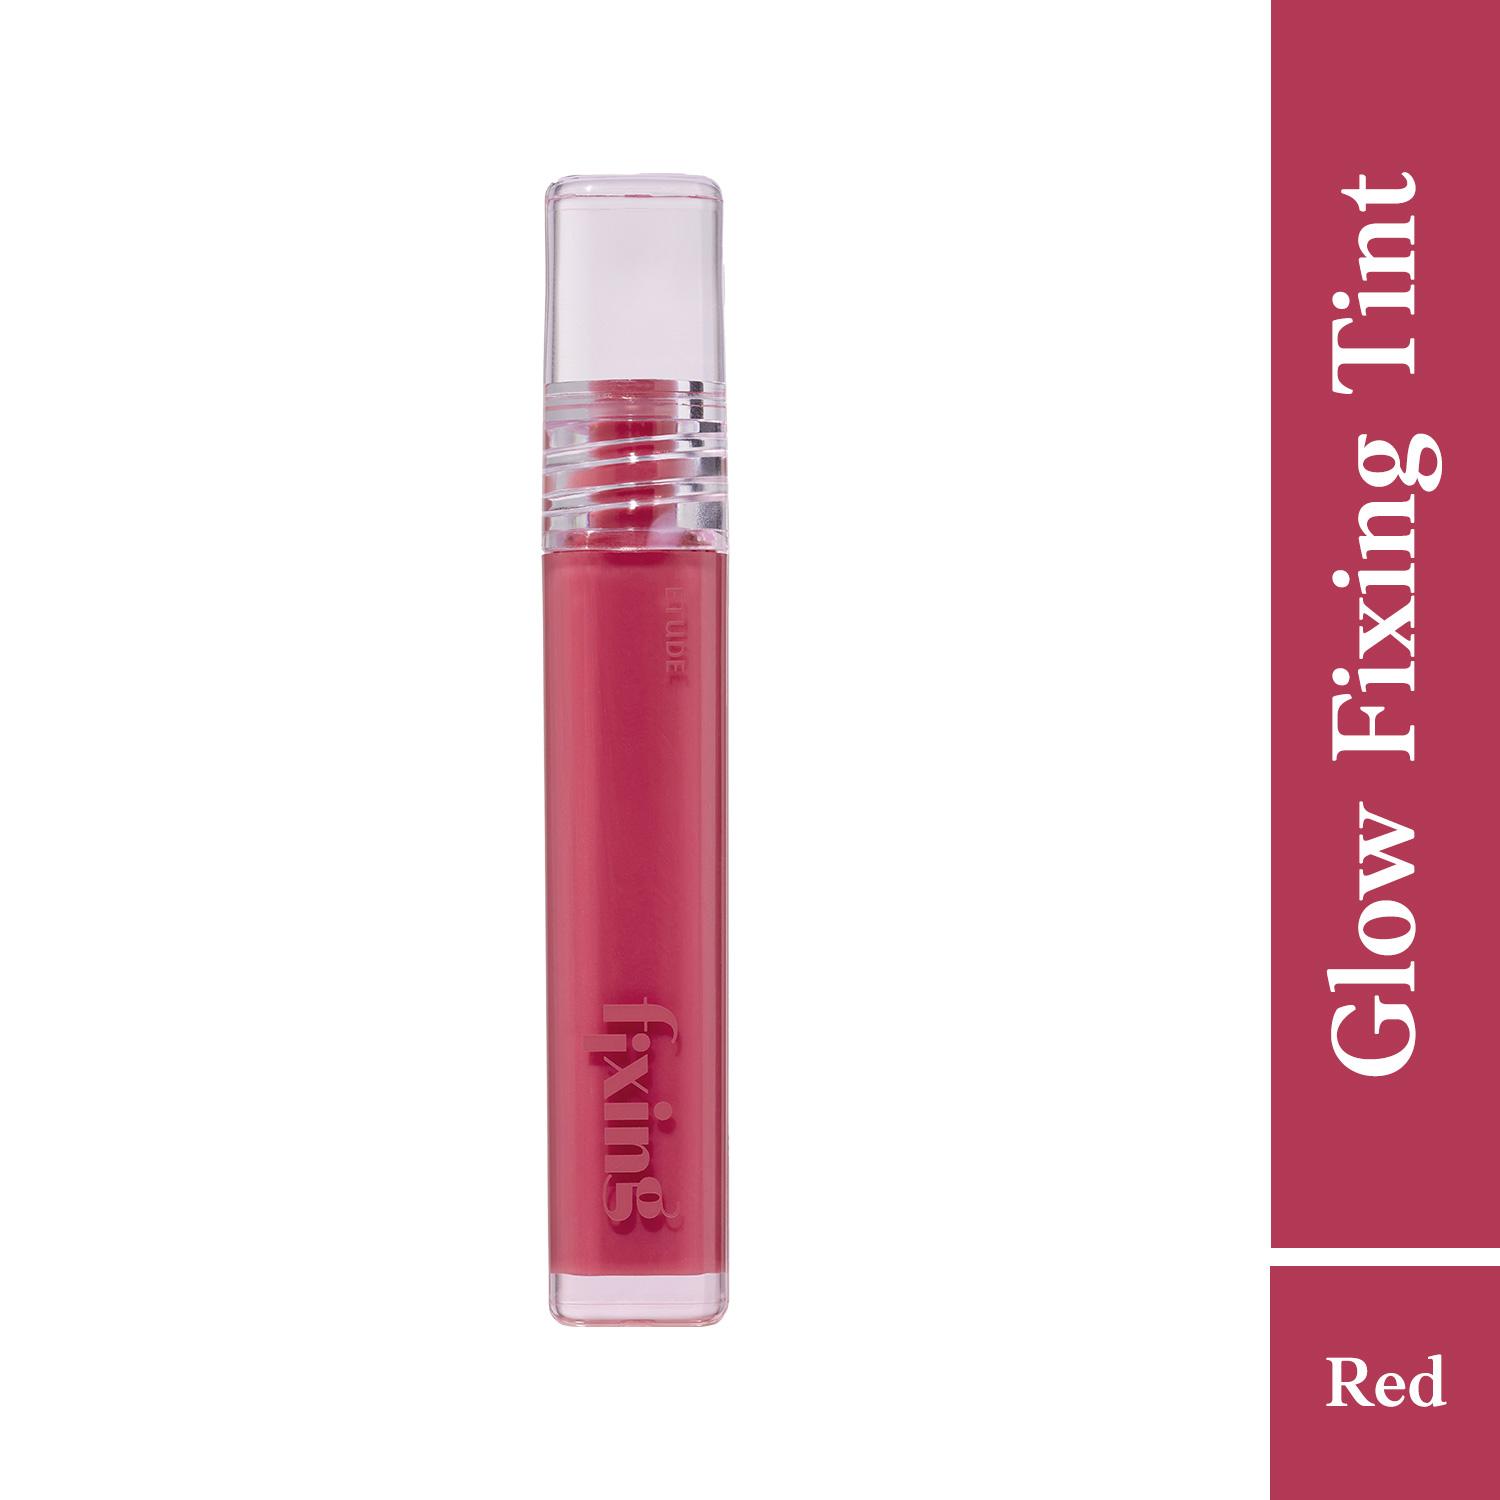 ETUDE HOUSE | ETUDE HOUSE Glow Fixing Tint - 04 Chilling Red (3.8 g)